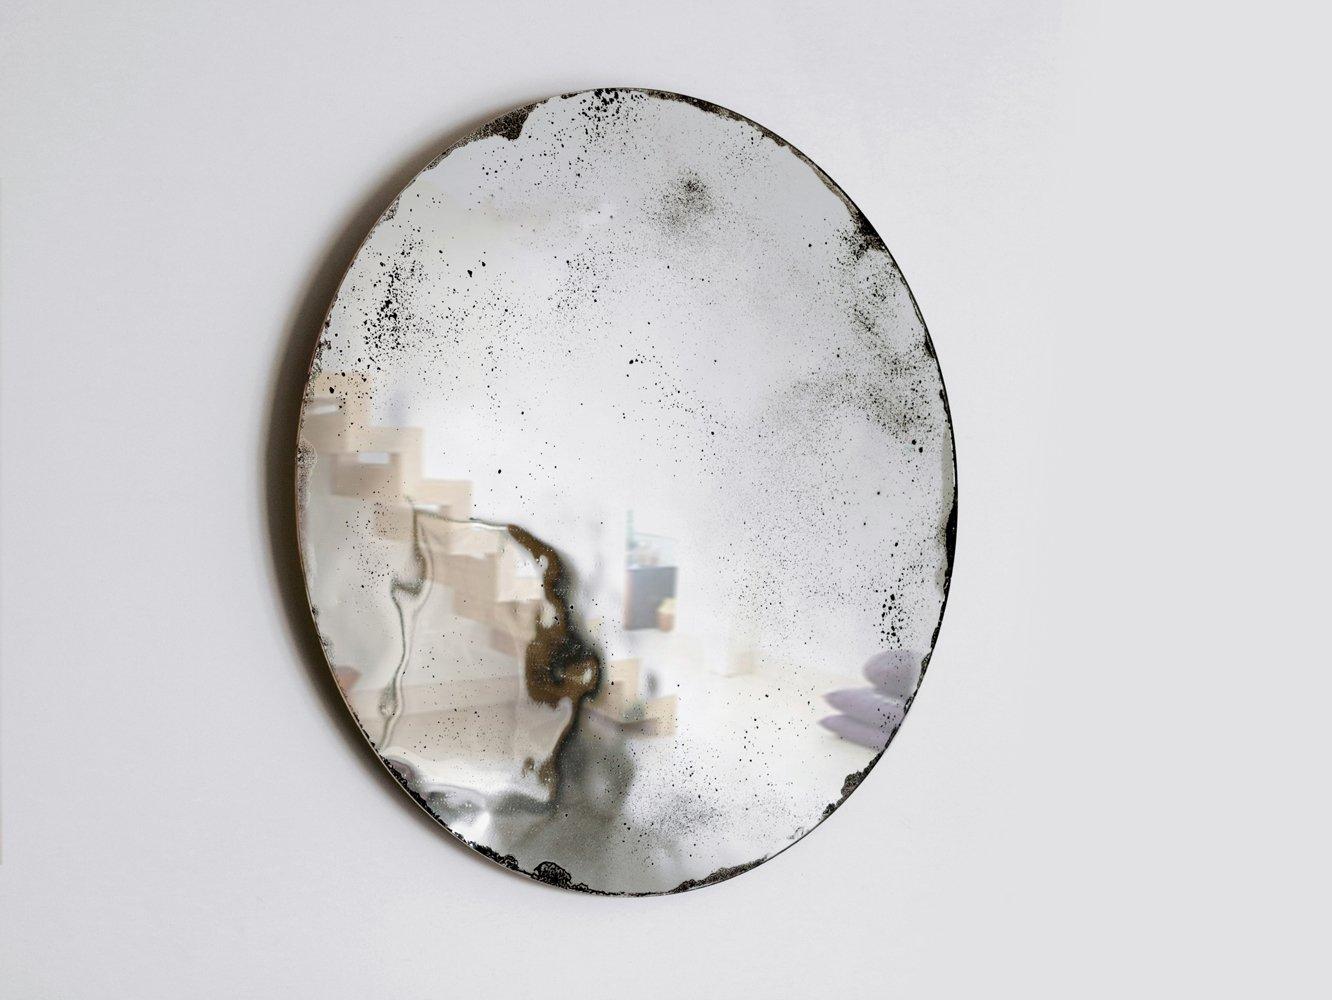 Extra large alice mirror by Slow Design 
Dimensions: Diameter 120 cm 
Materials: Glass. gold/ grey/ blue/ moss green /MD on back side oxidation effect on the clear mirror.
Technique: Grisaille.
Available in gold/moss green/blue/black. Also